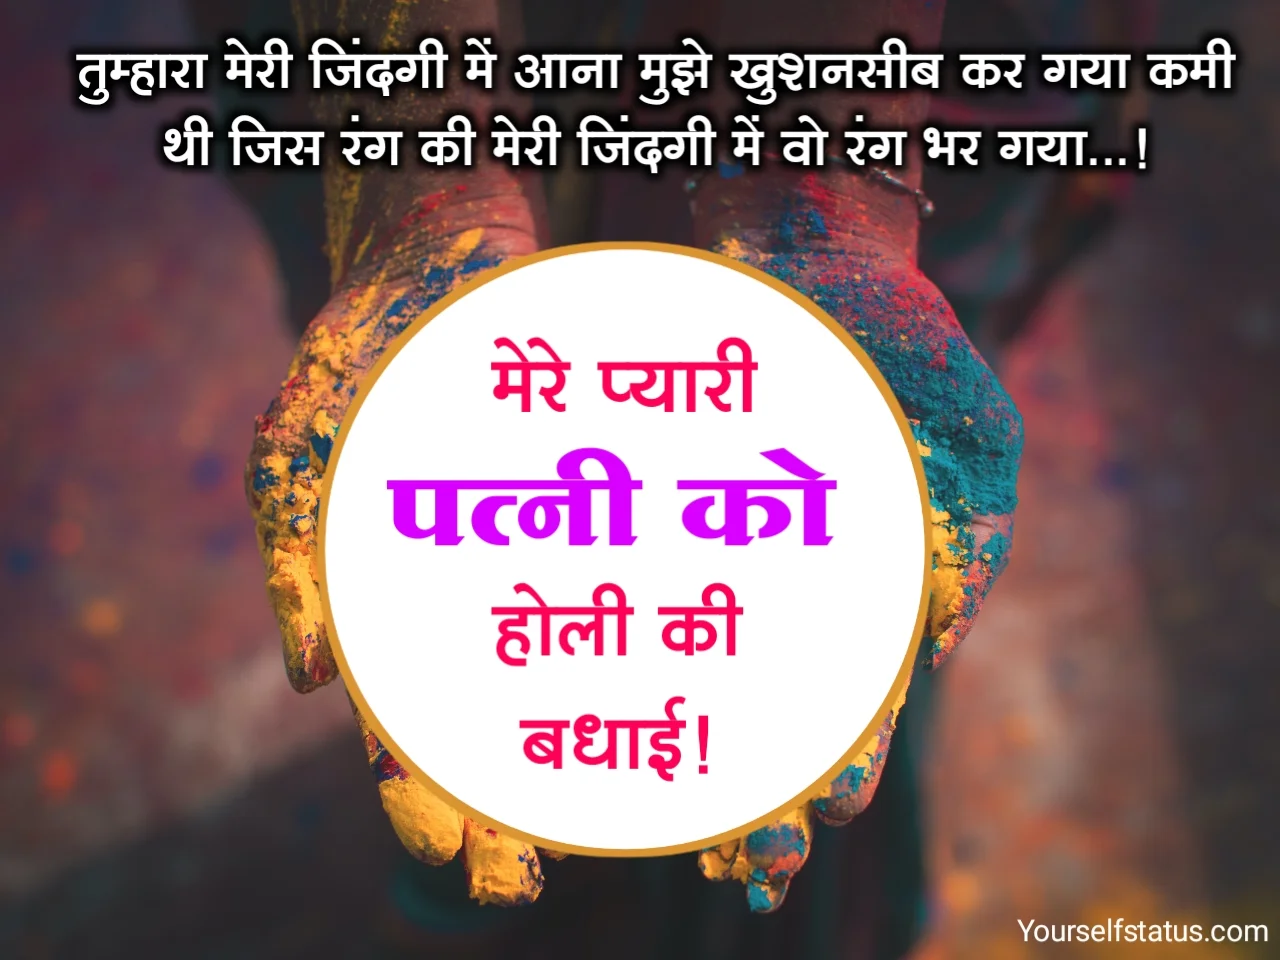 Holi wishes in hindi for wife